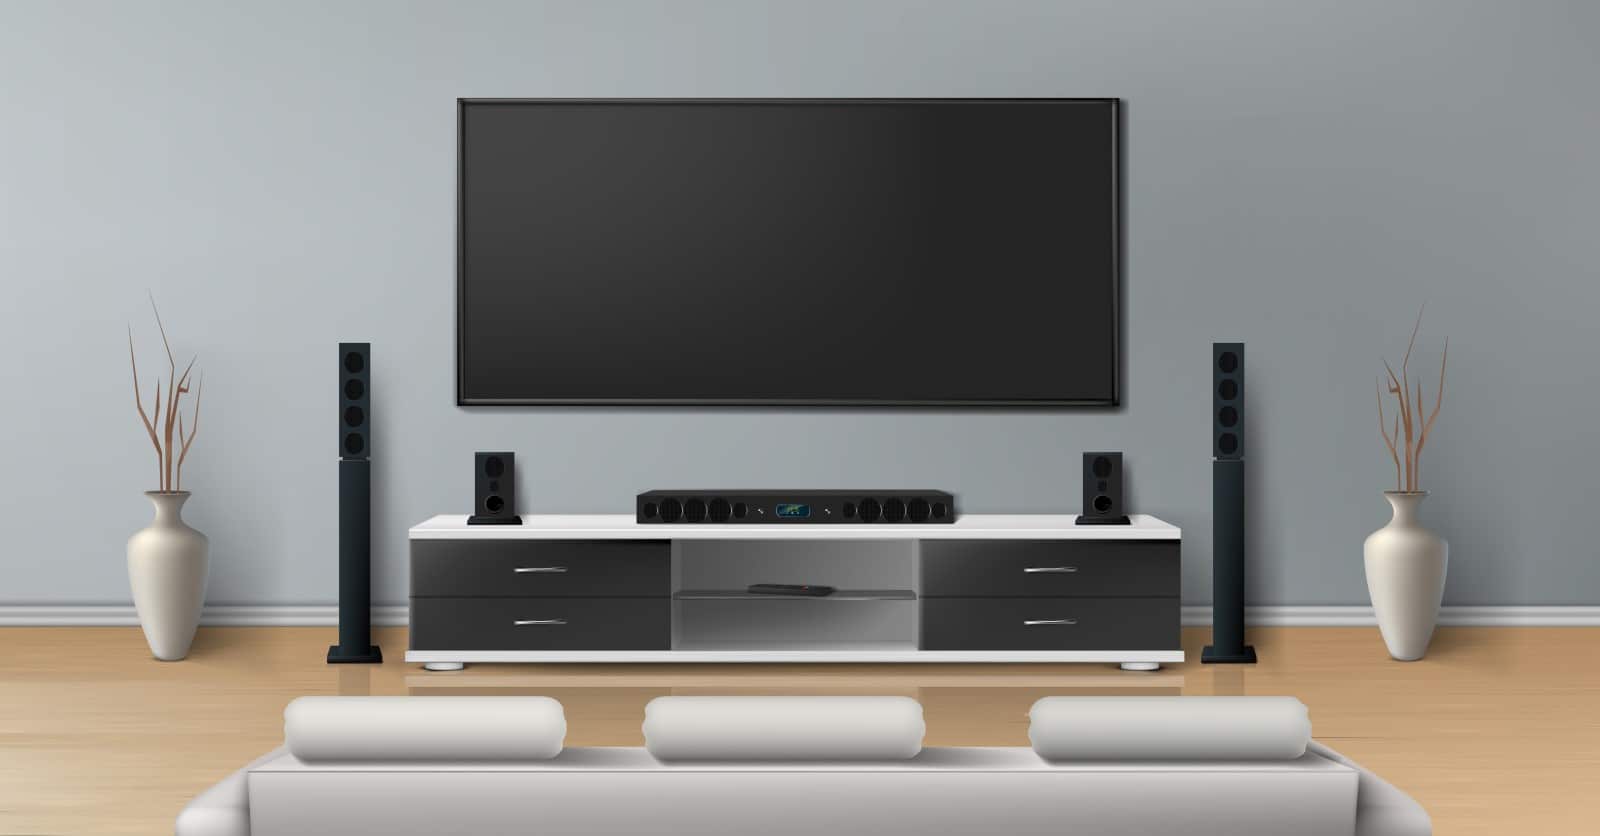 A flat screen TV, surround sound, and equipment concept.